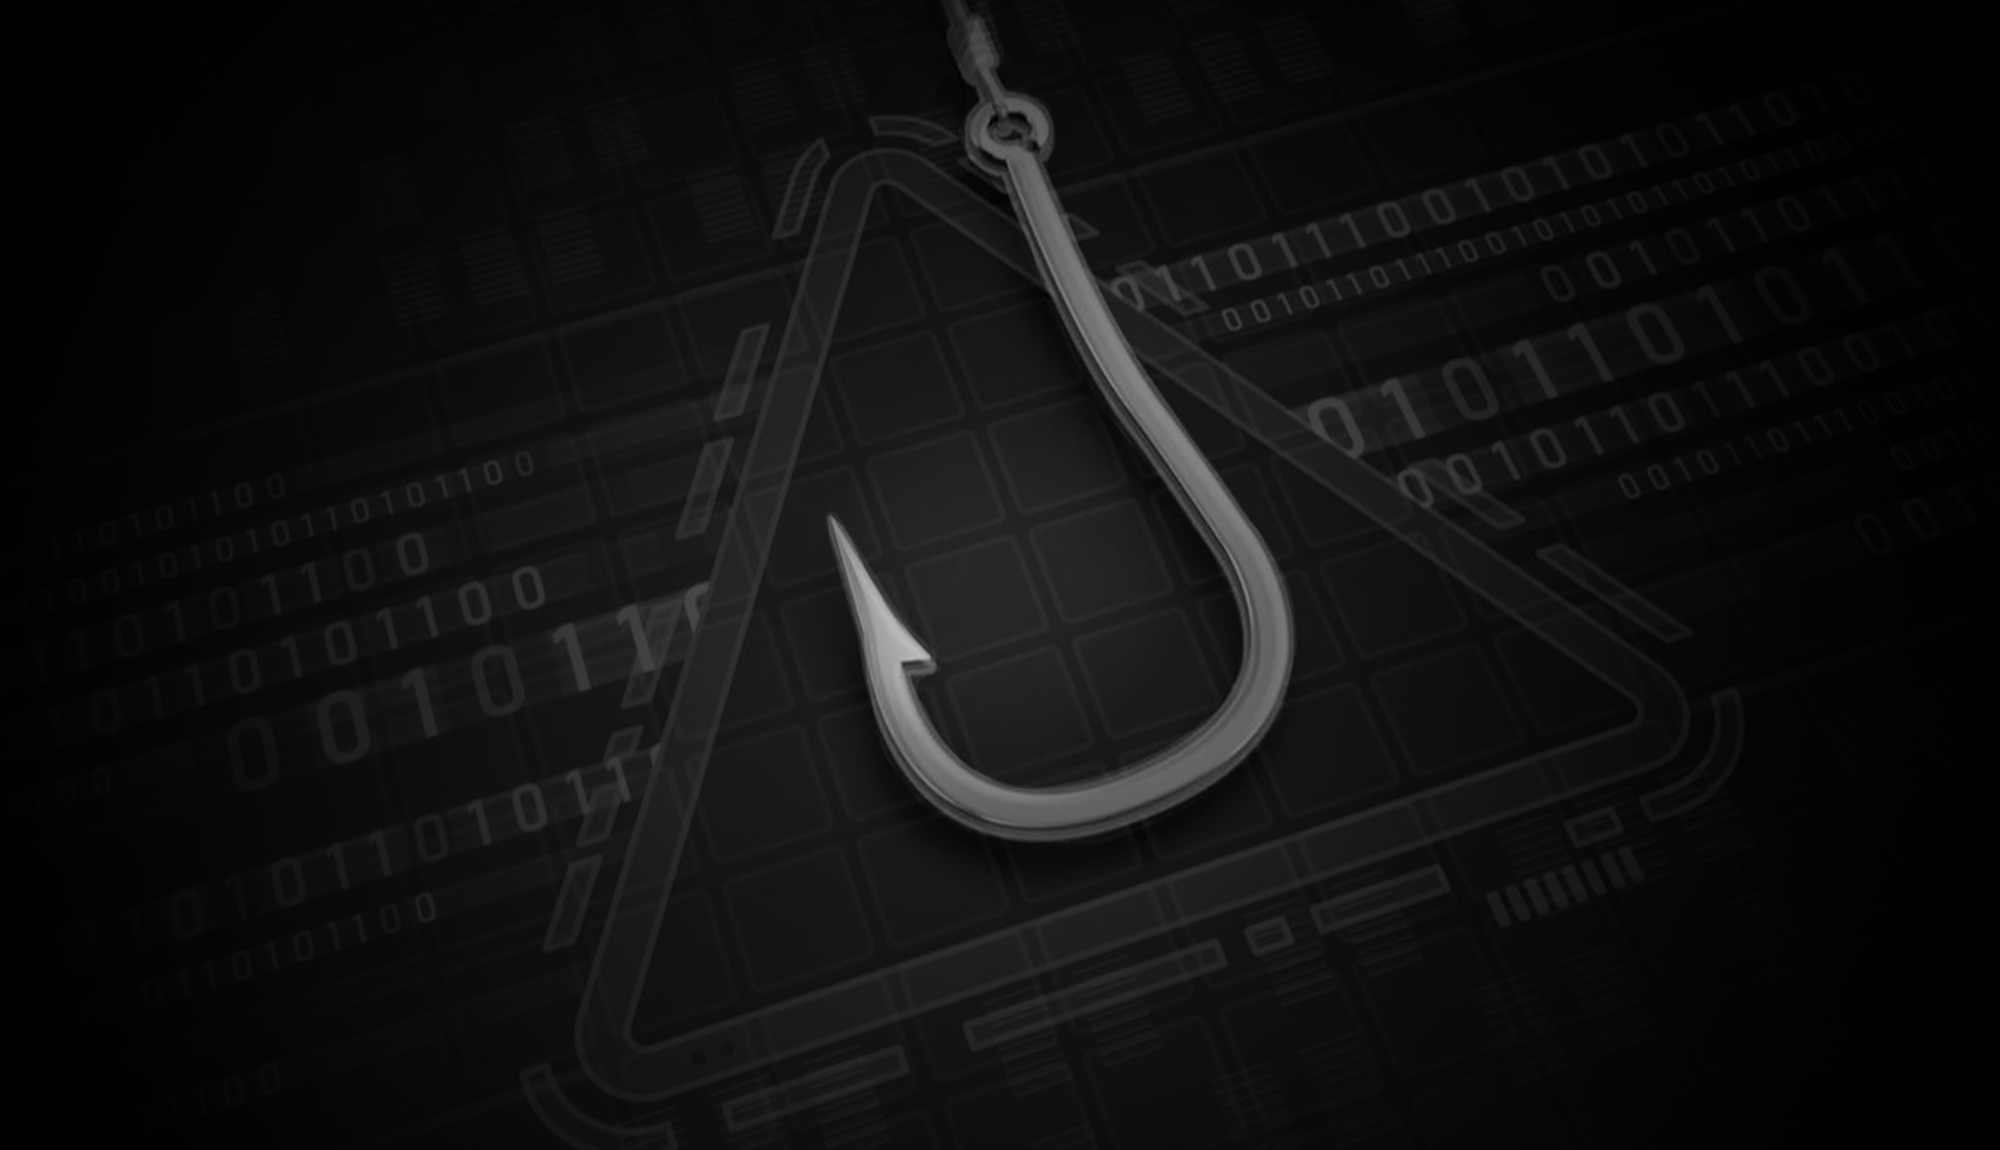 EvilProxy Phishing-as-a-Service with MFA Bypass Emerged in Dark Web